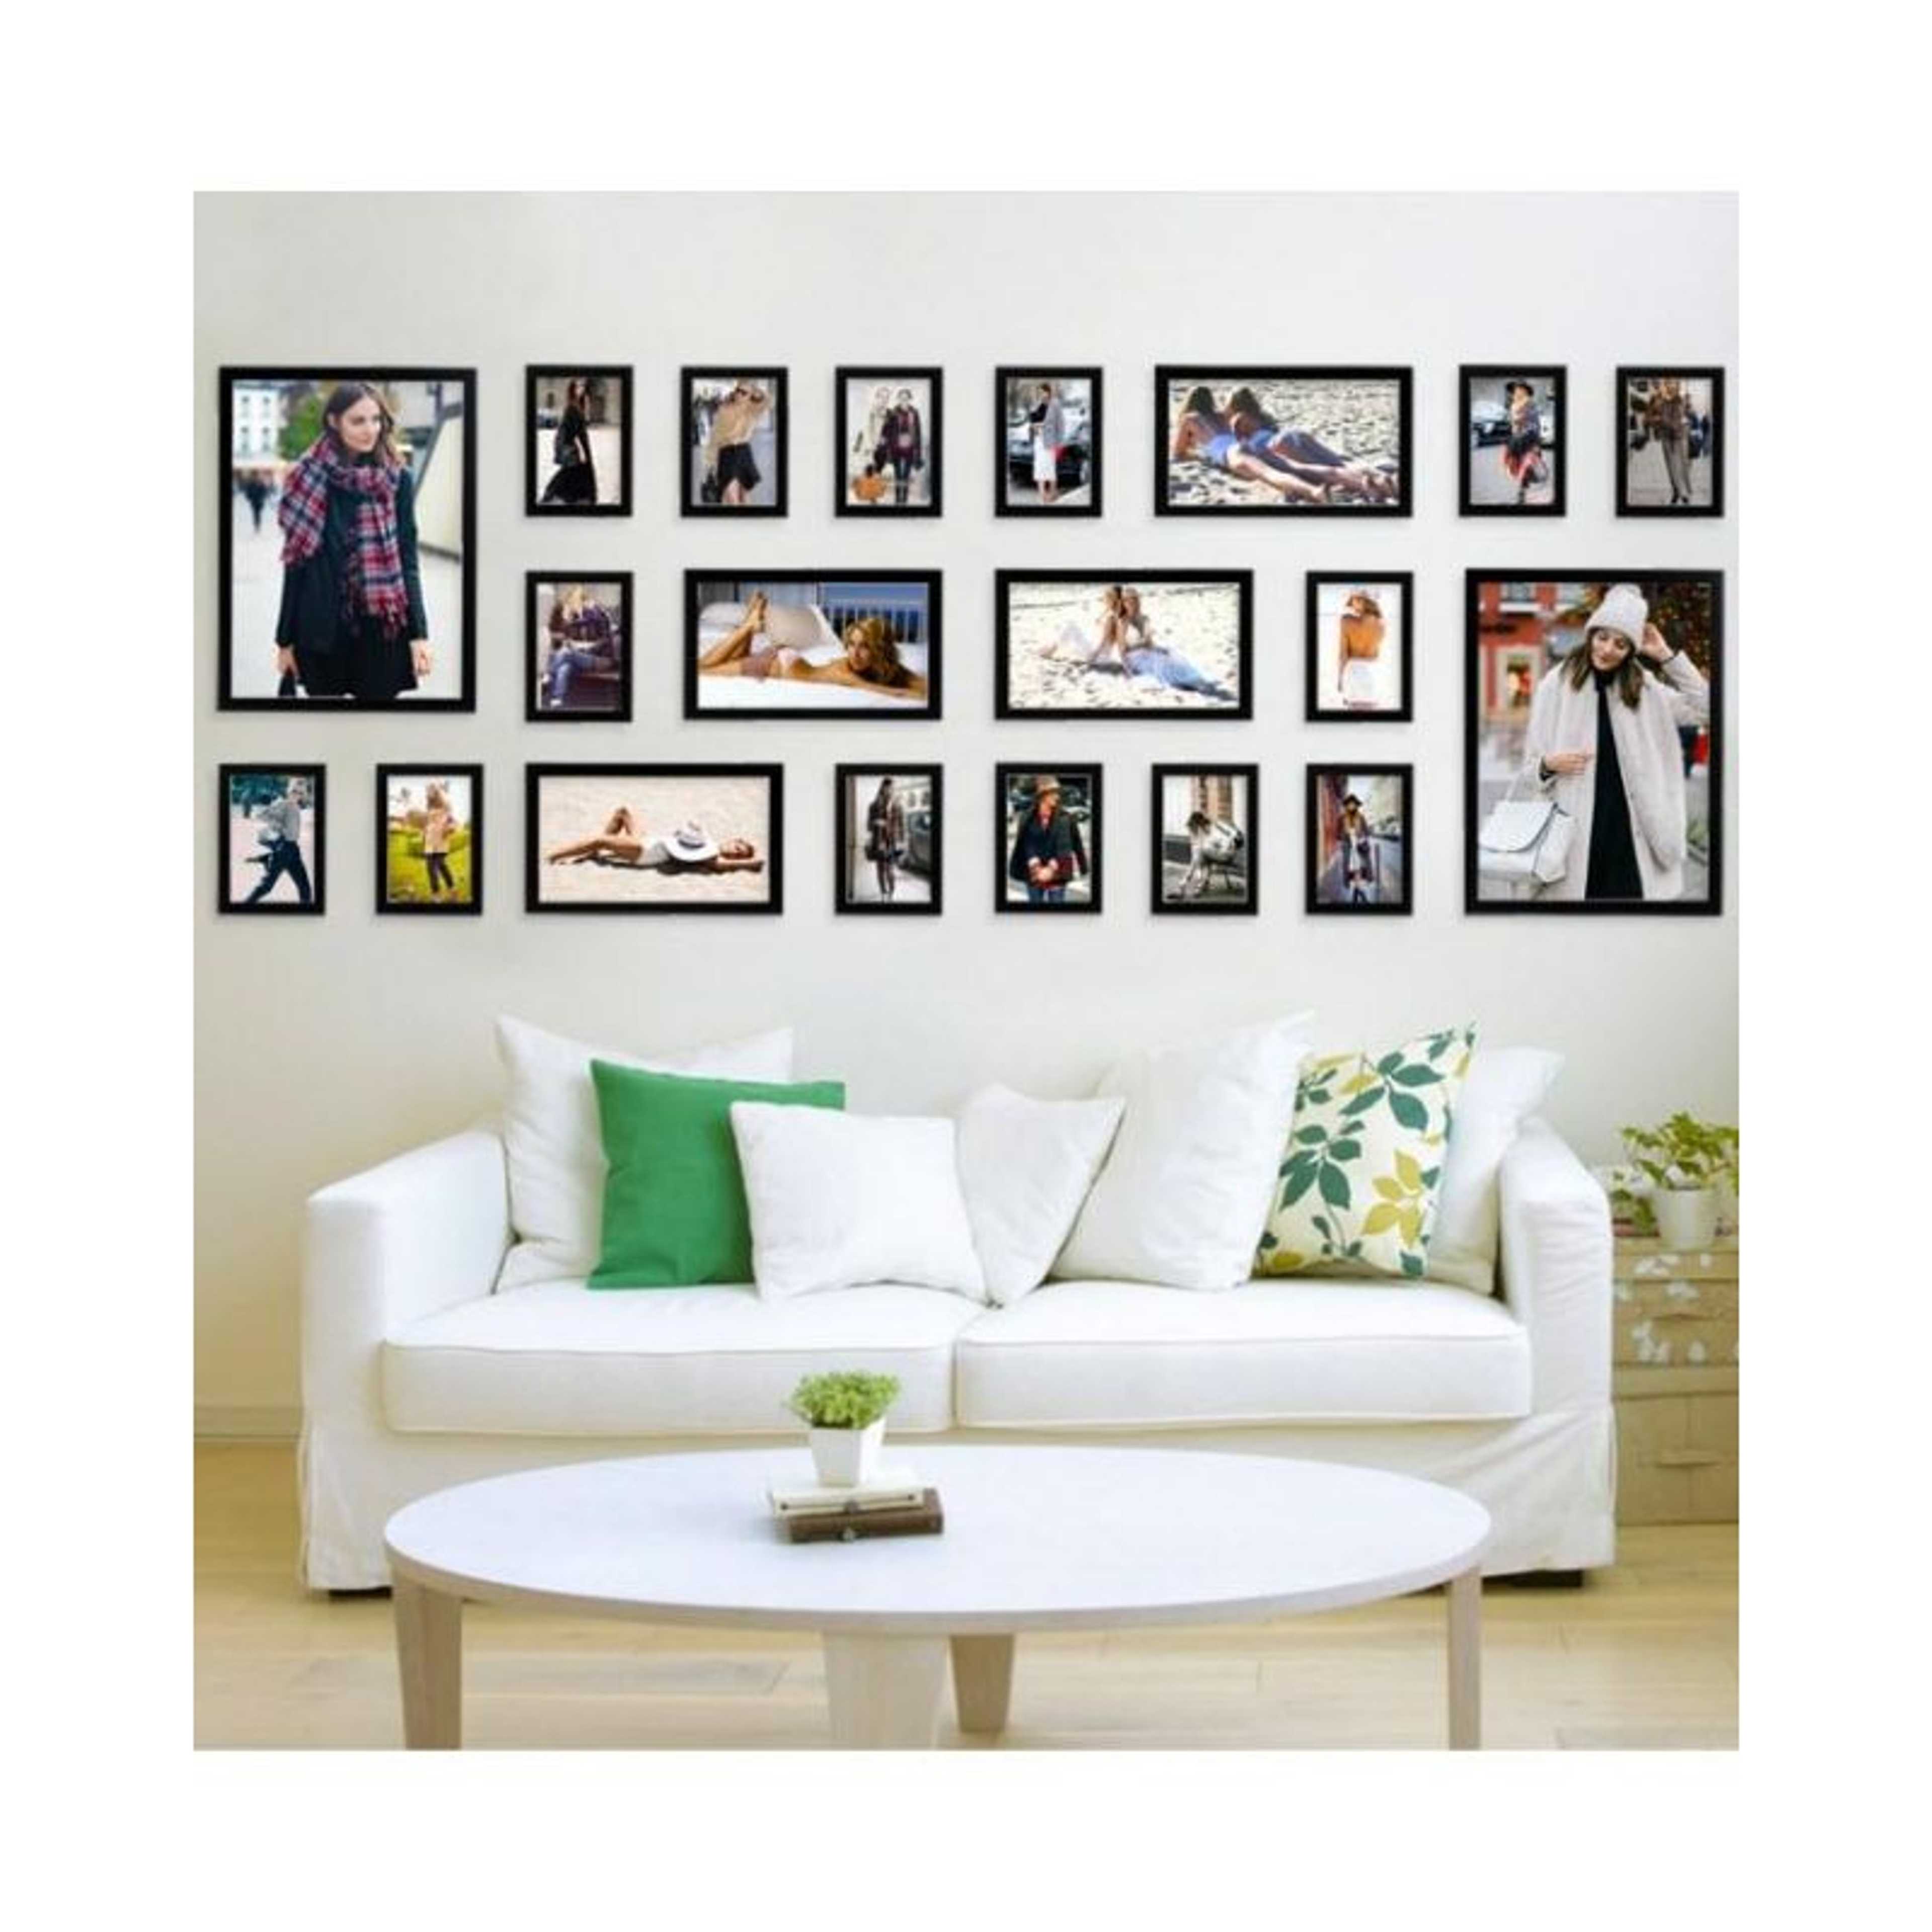 Set of 20 - Photo Frames Collage Wall Hanging Wall Decor Set - Black